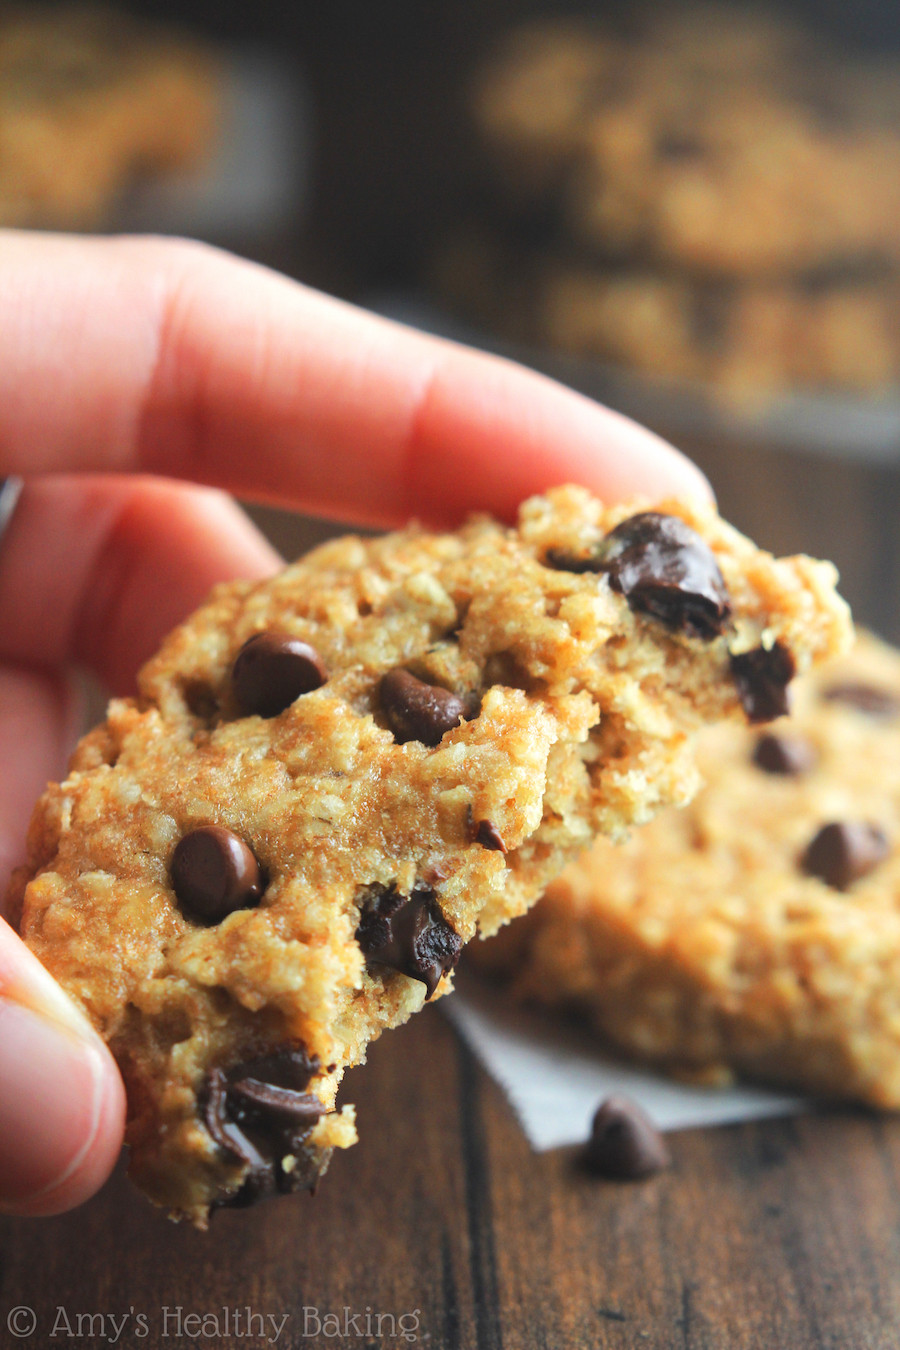 Oatmeal Chocolate Chip Cookies Healthy
 Chocolate Chip Peanut Butter Oatmeal Cookies Recipe Video